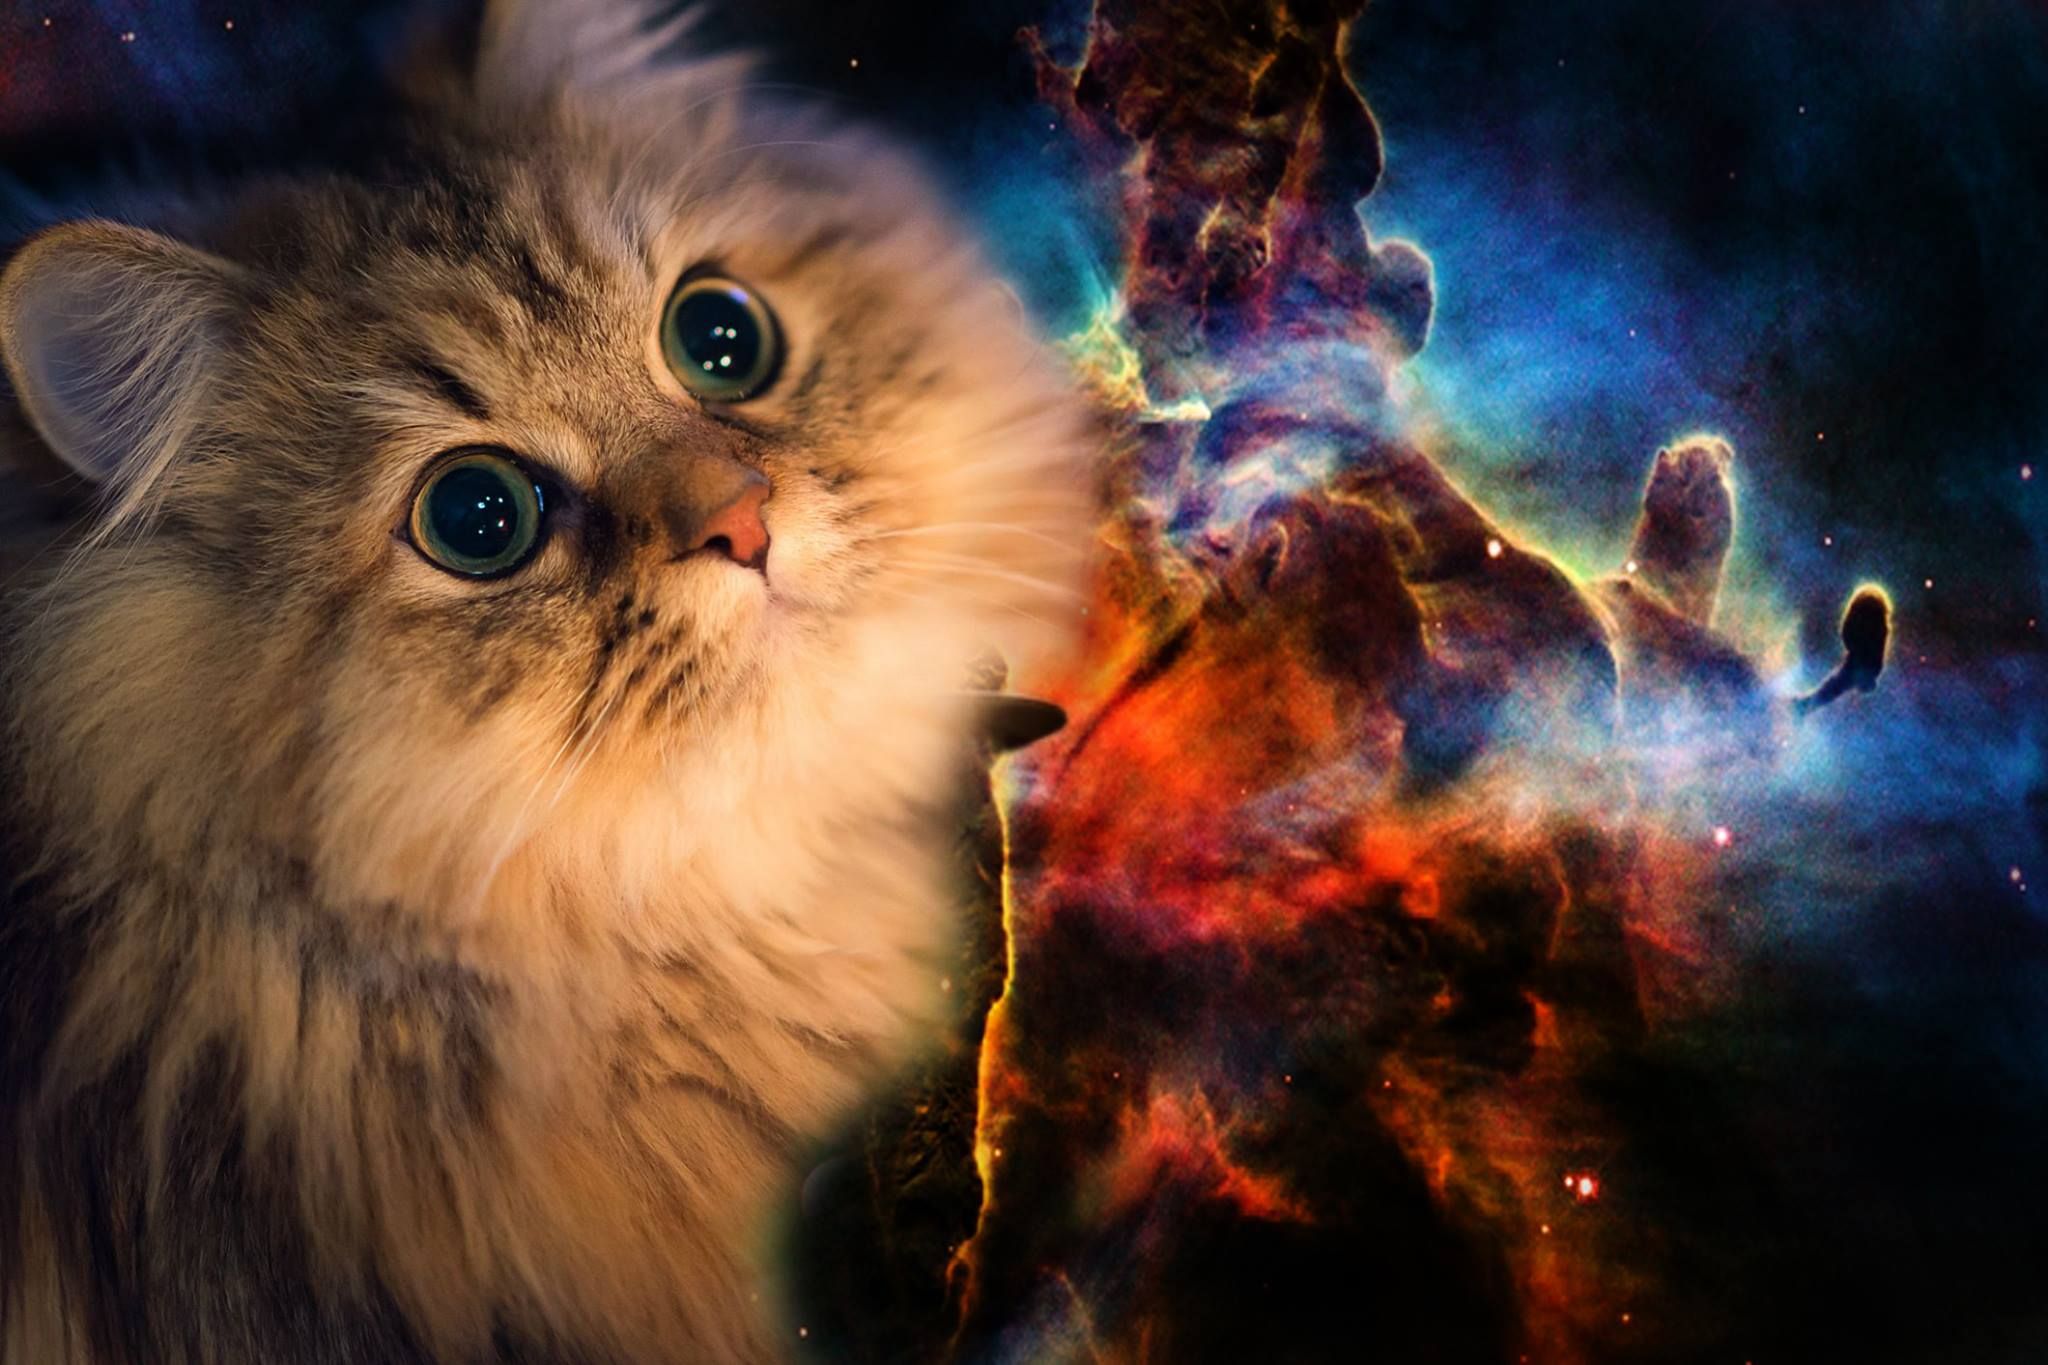 Space Cat Wallpapers High Quality For Desktop Wallpaper Kittens